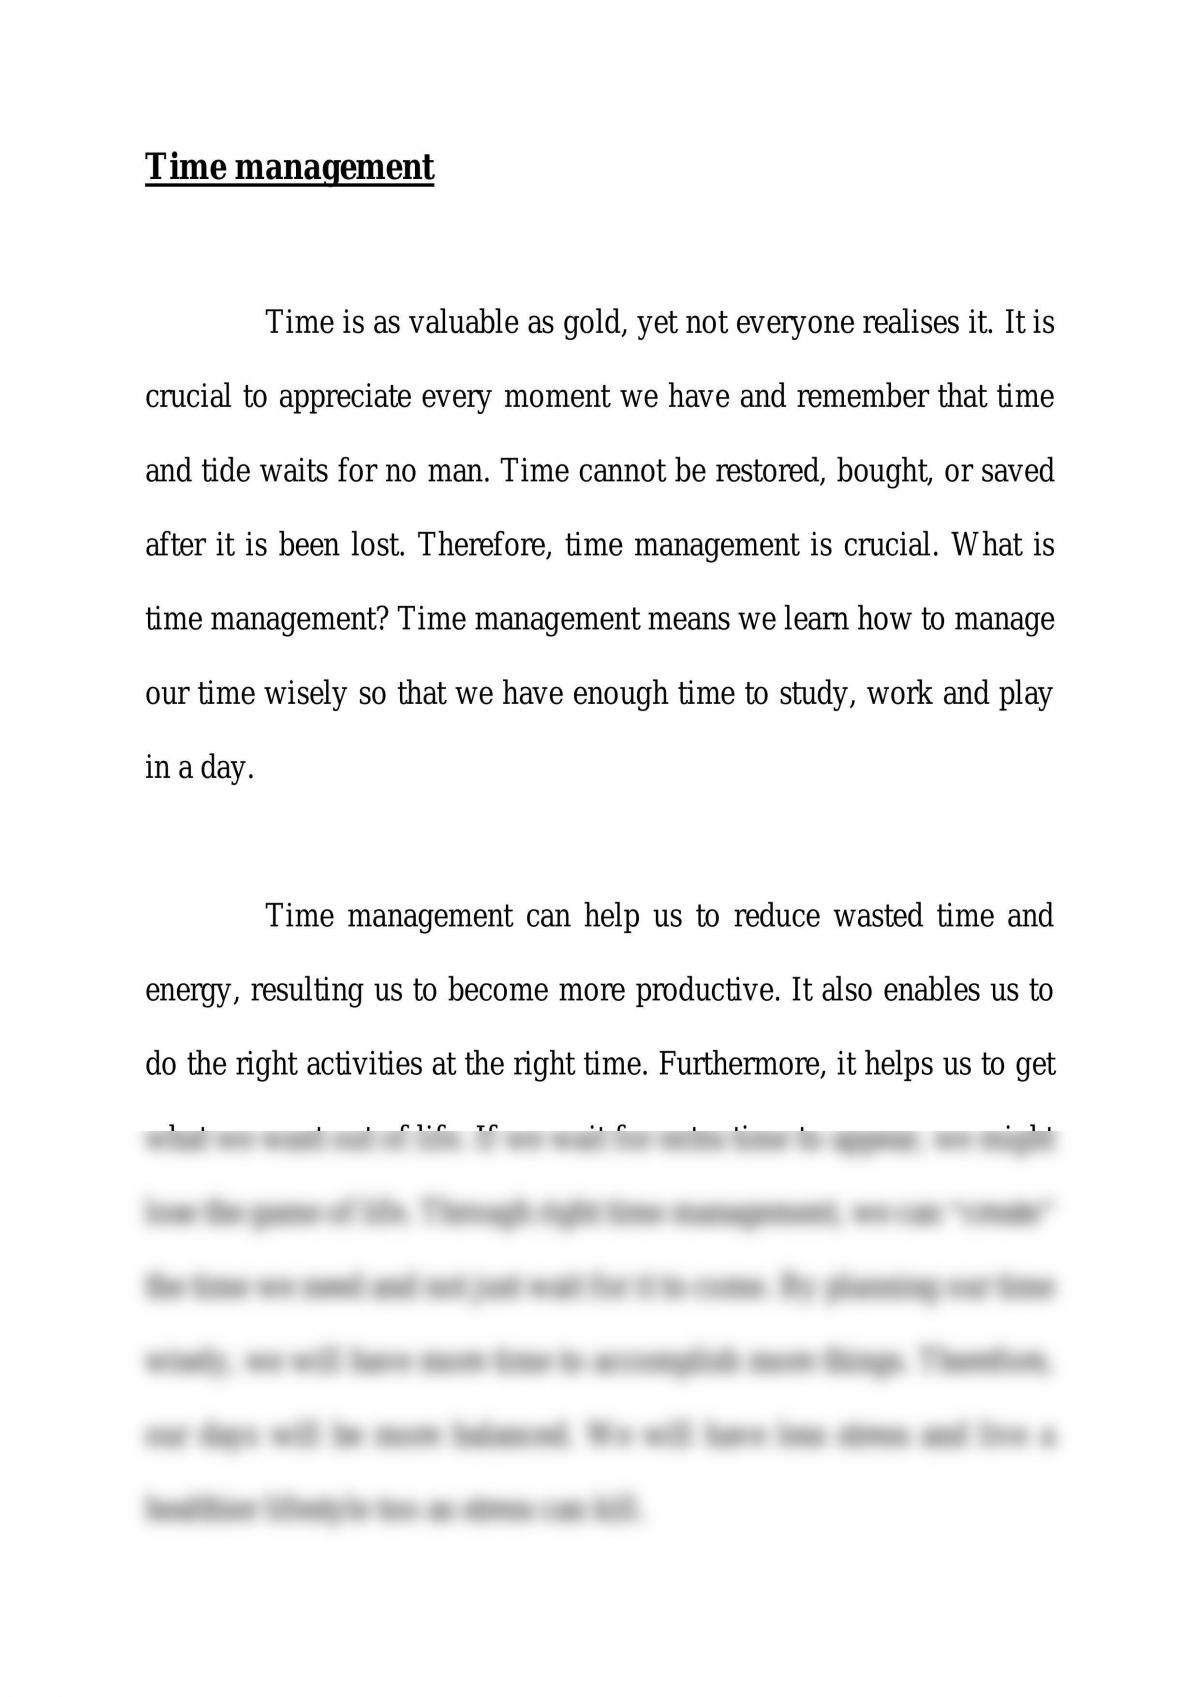 an essay on time management